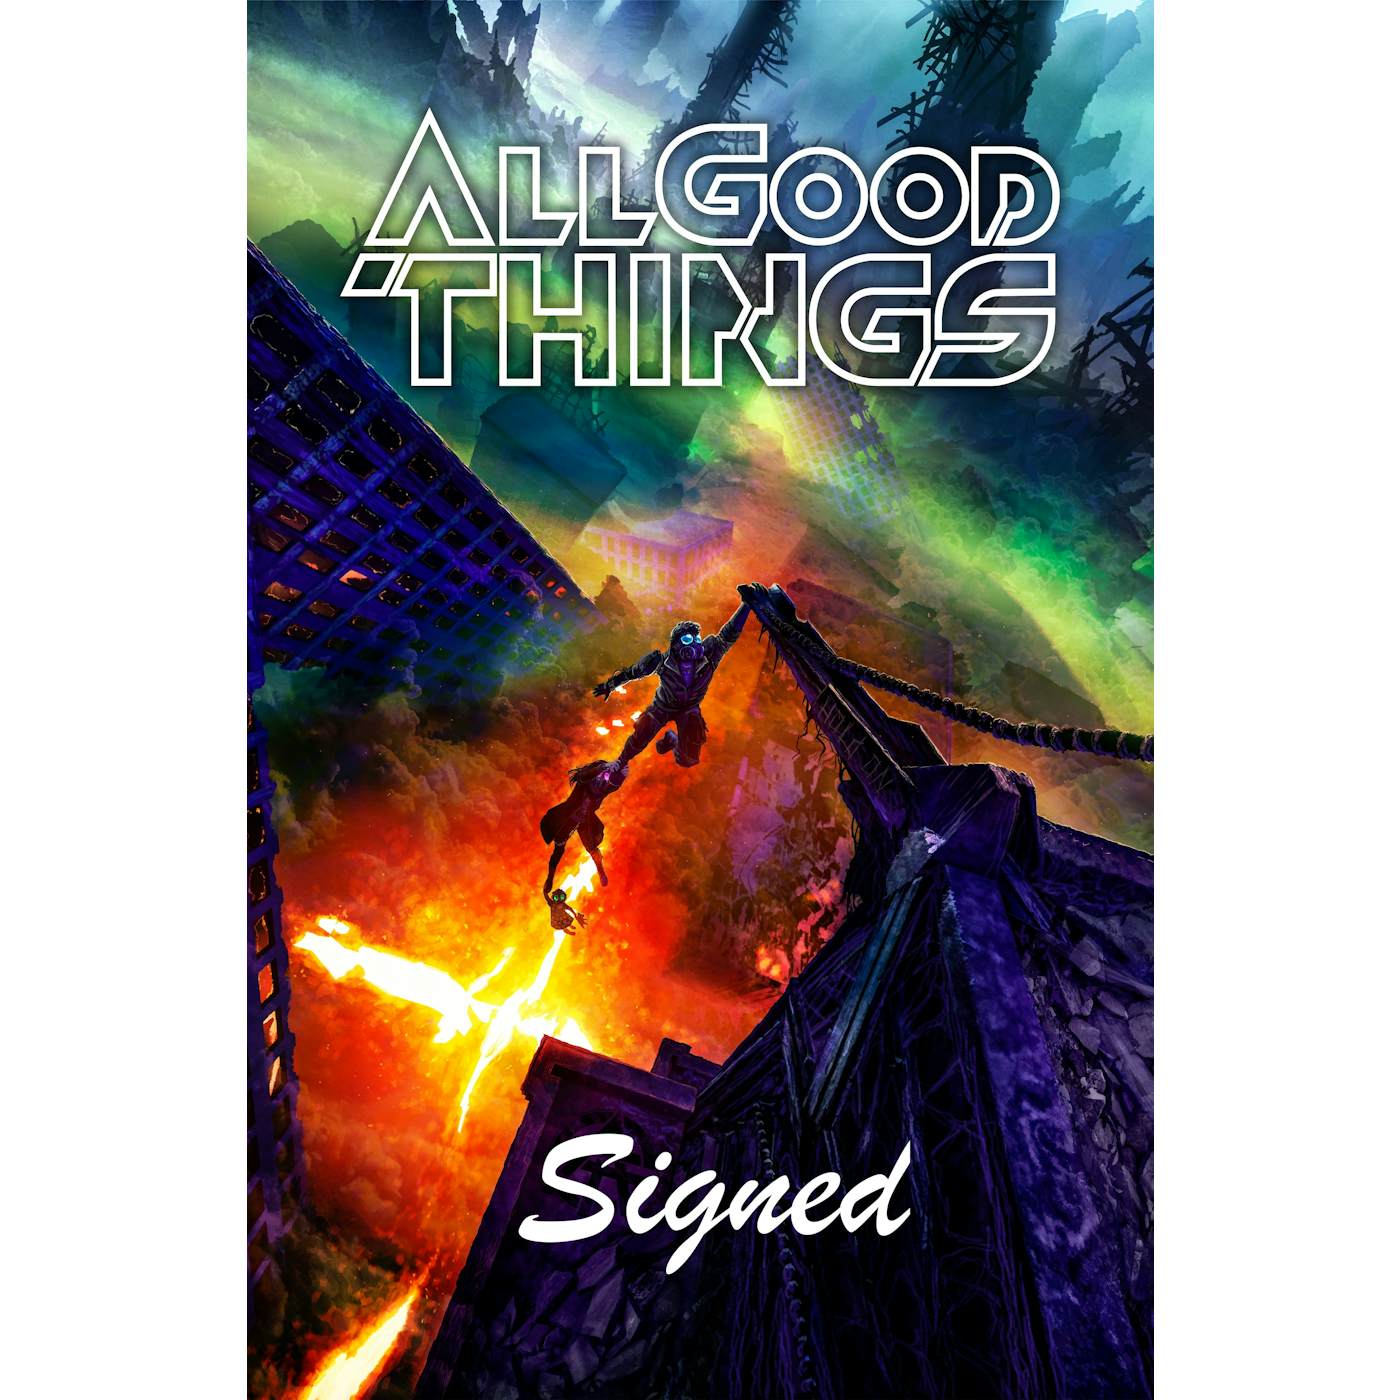 ALL GOOD THINGS - "HOLD ON" POSTER **SIGNED**